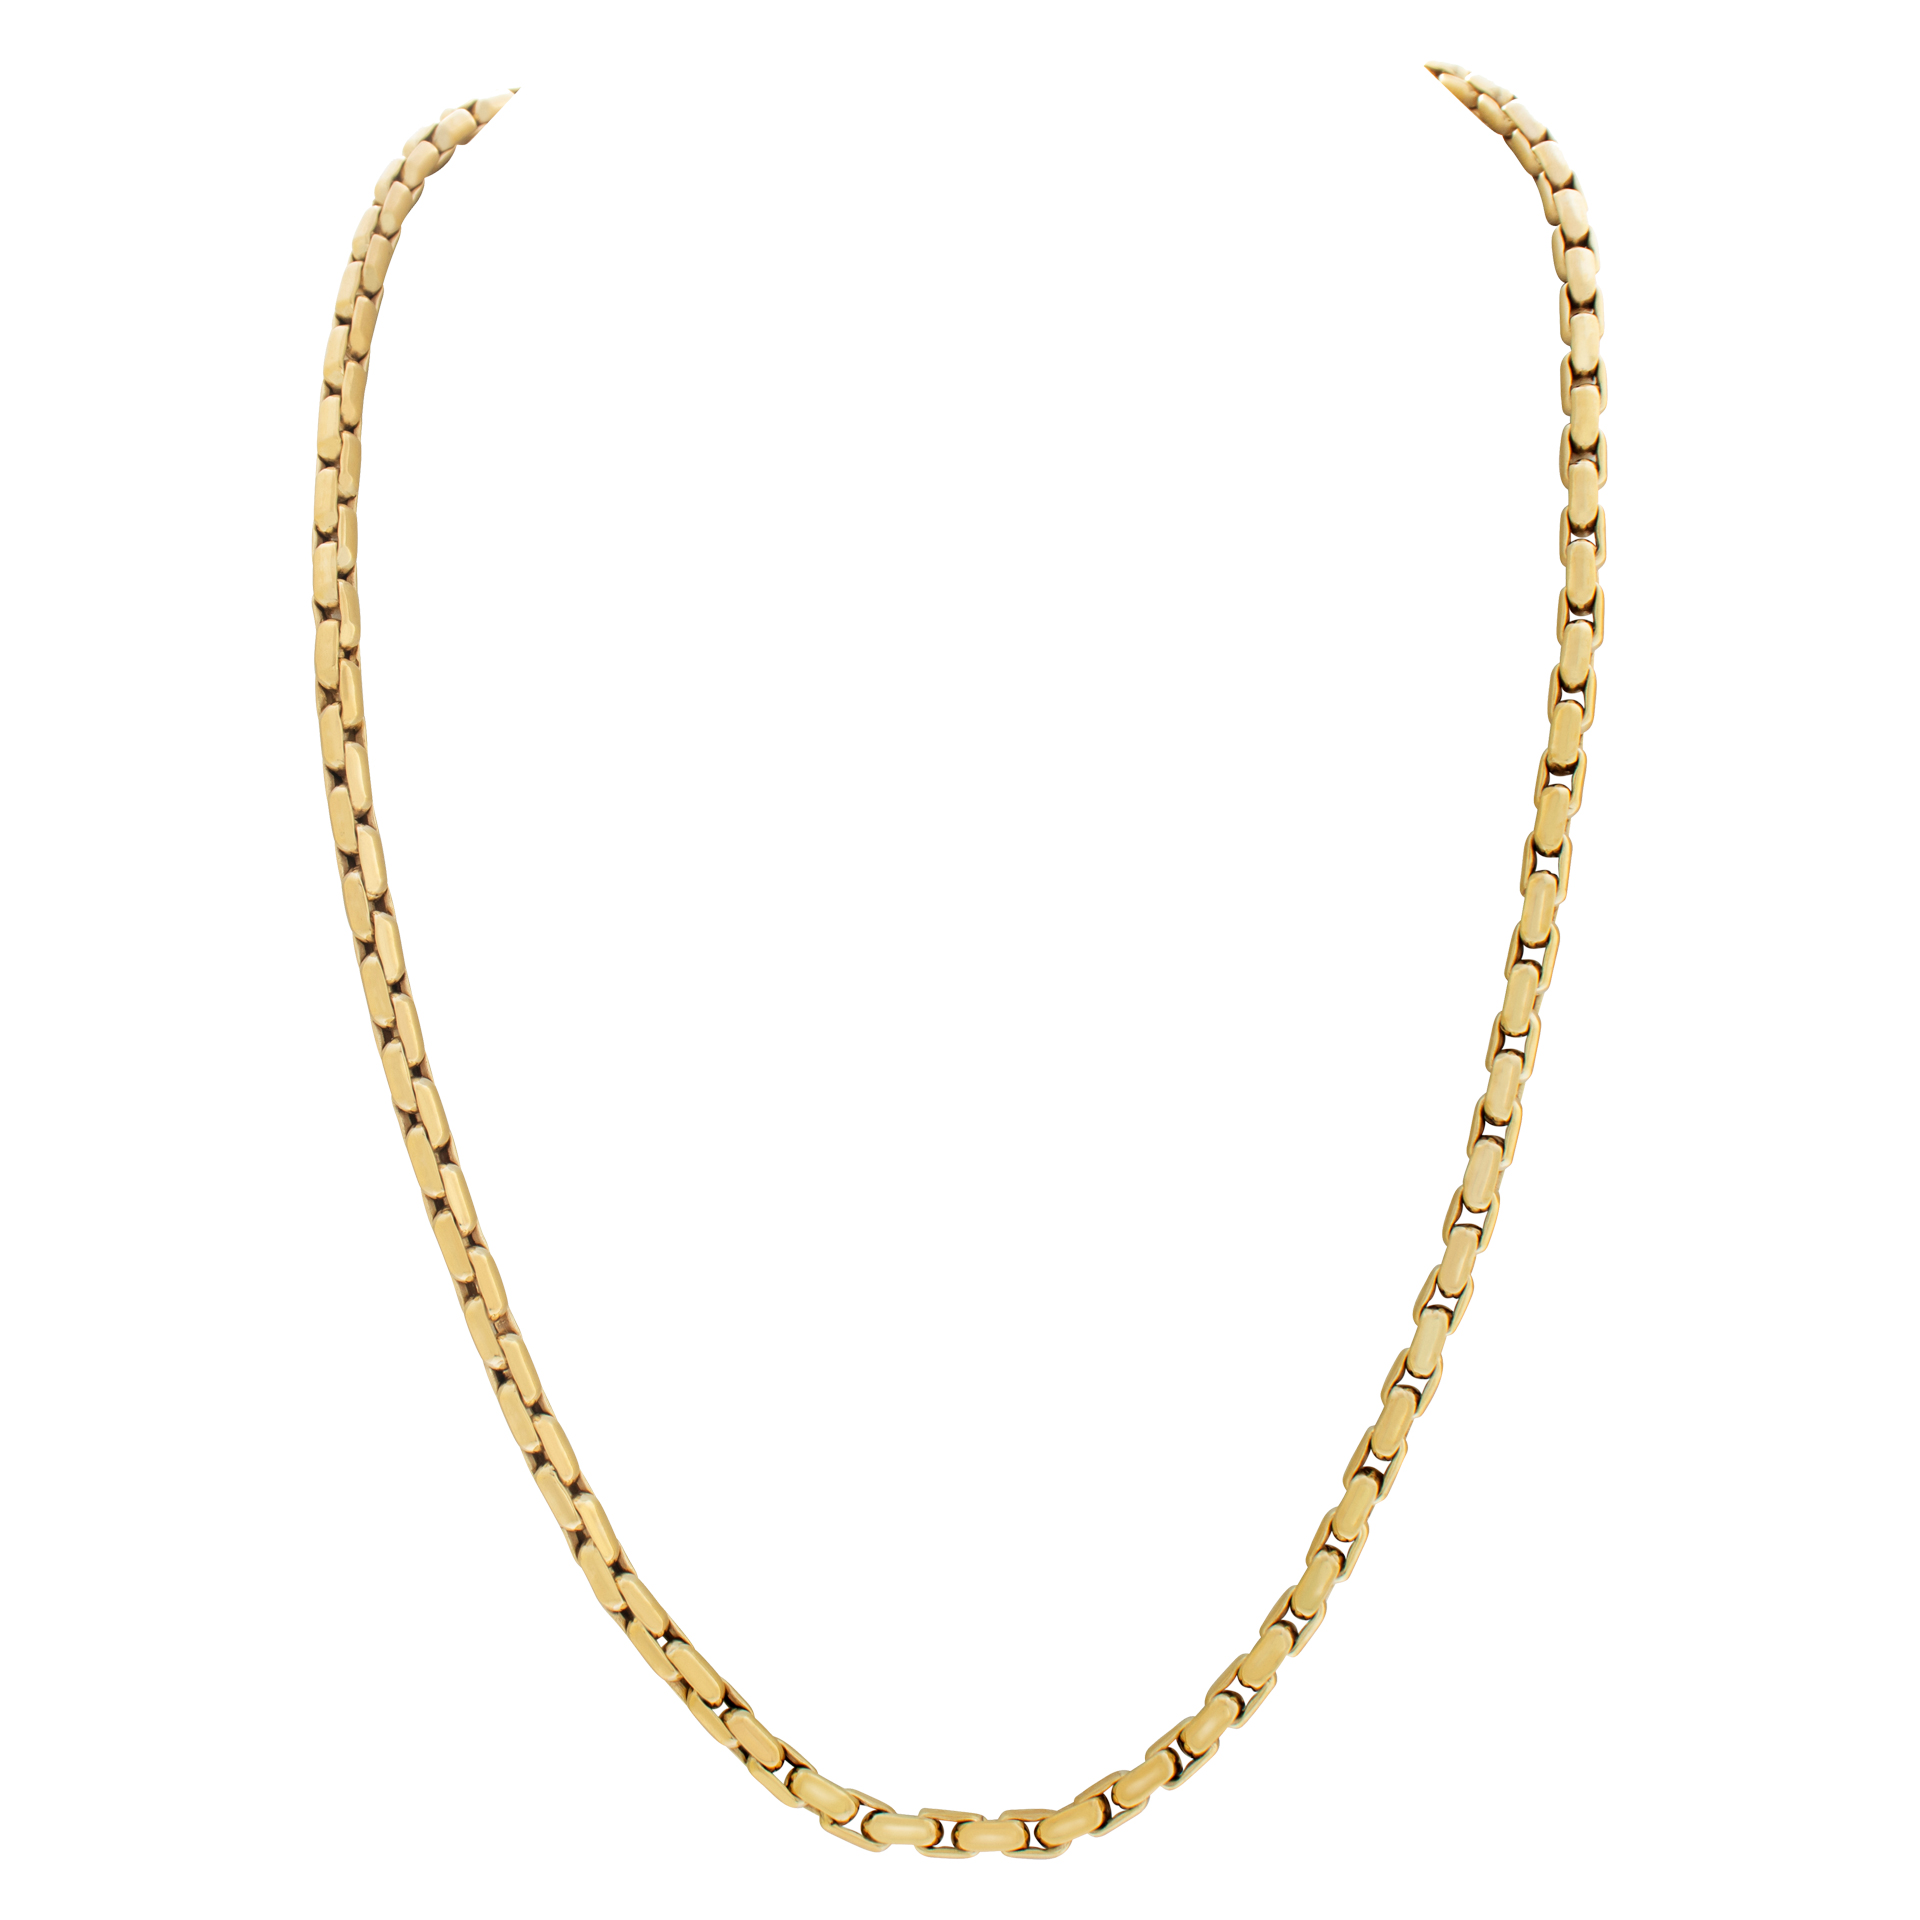 Flexible chainlink necklace in 14k yellow gold